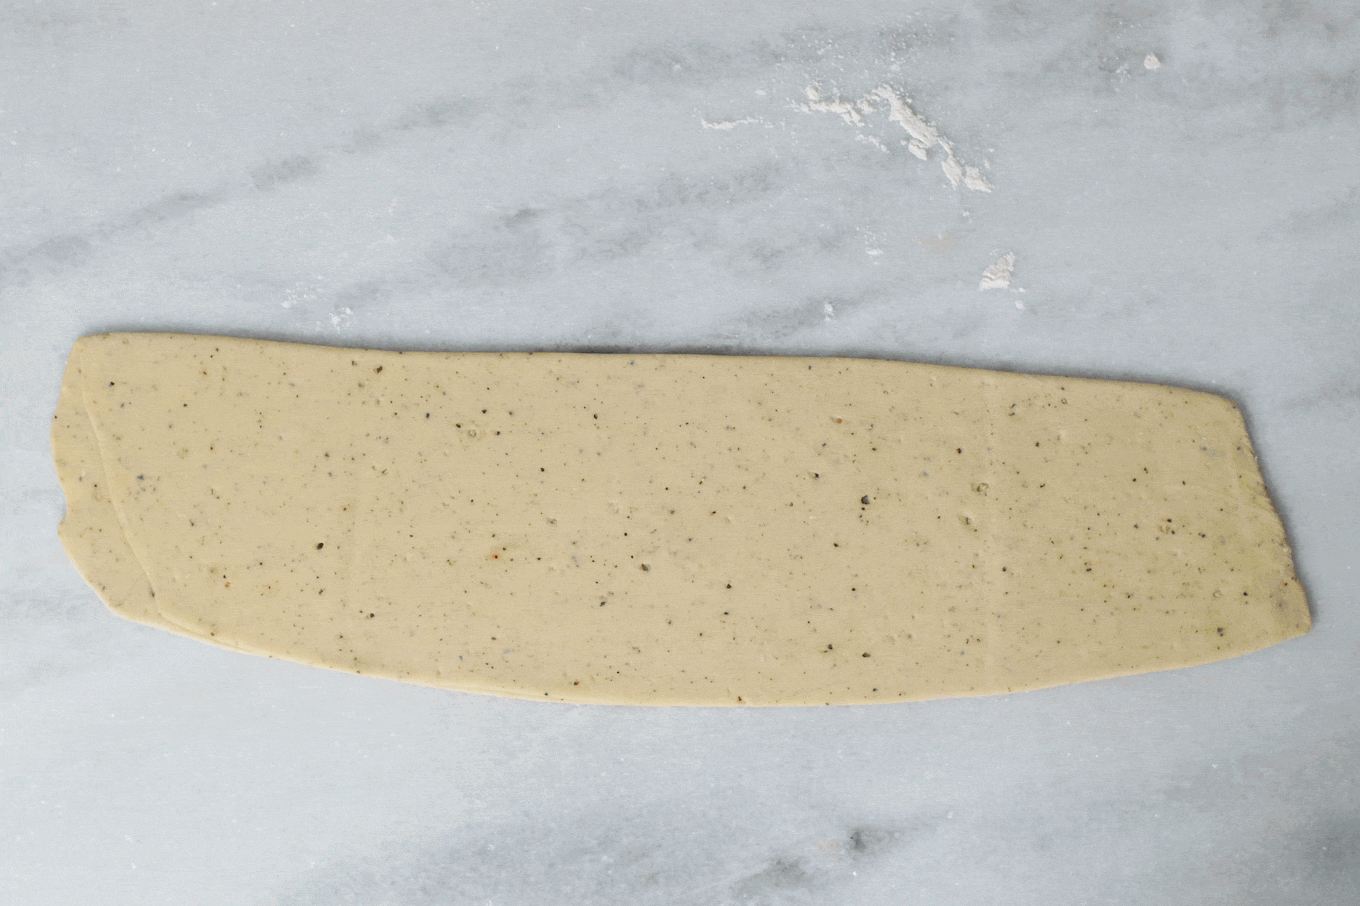 pasta folding technique during shaping and rolling